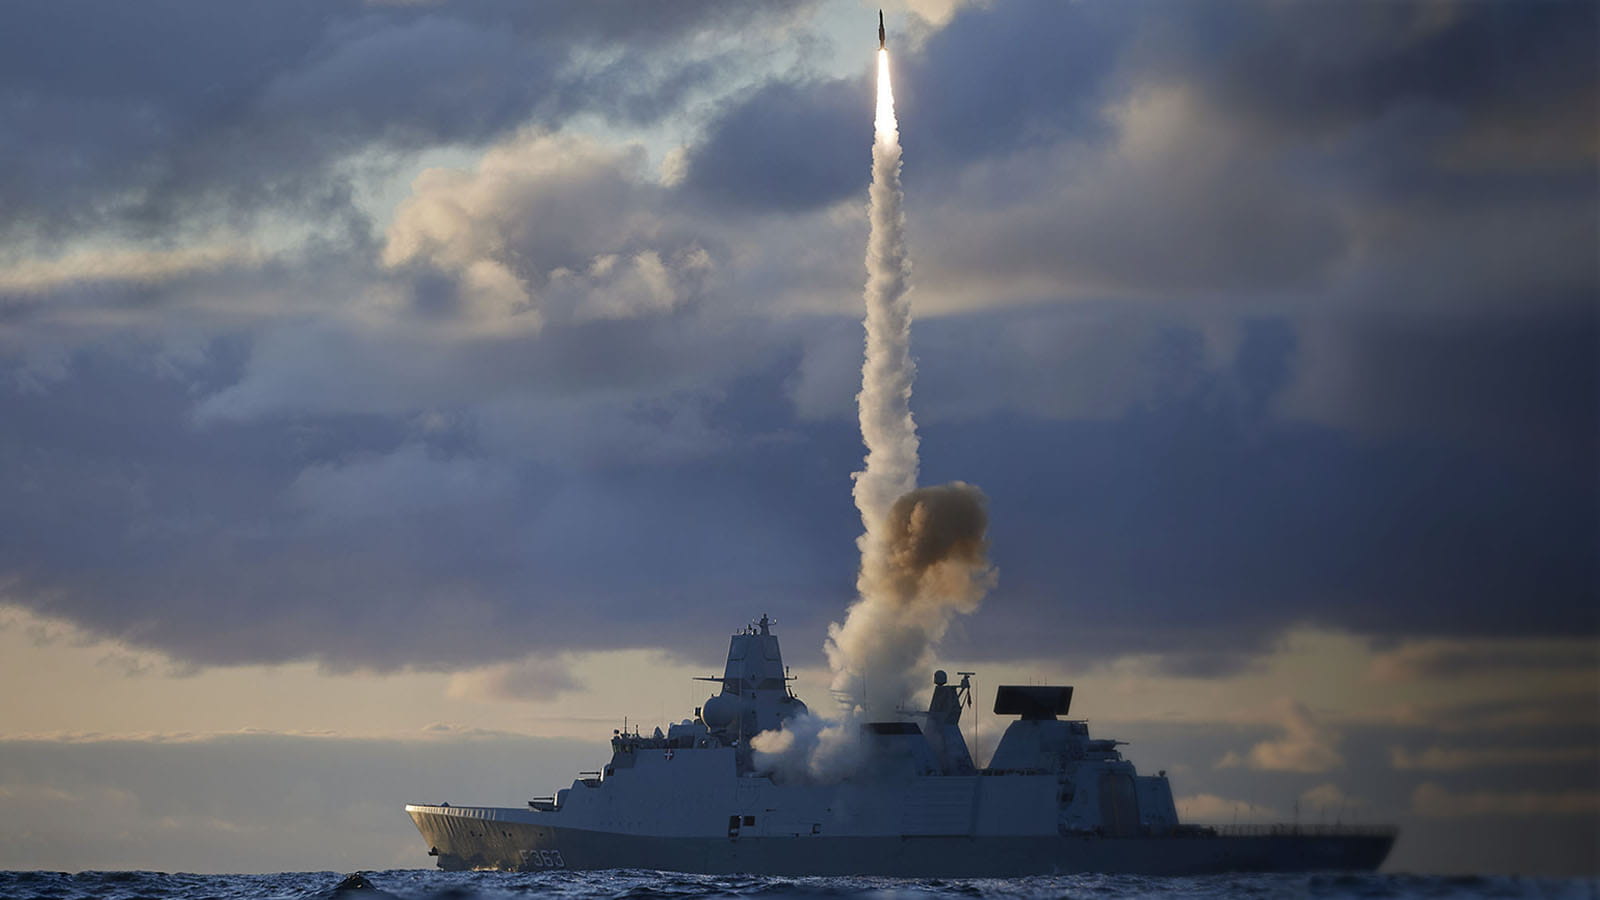 The SM-2 missile is primarily used by U.S. and allied navies for fleet air defense and ship defense.